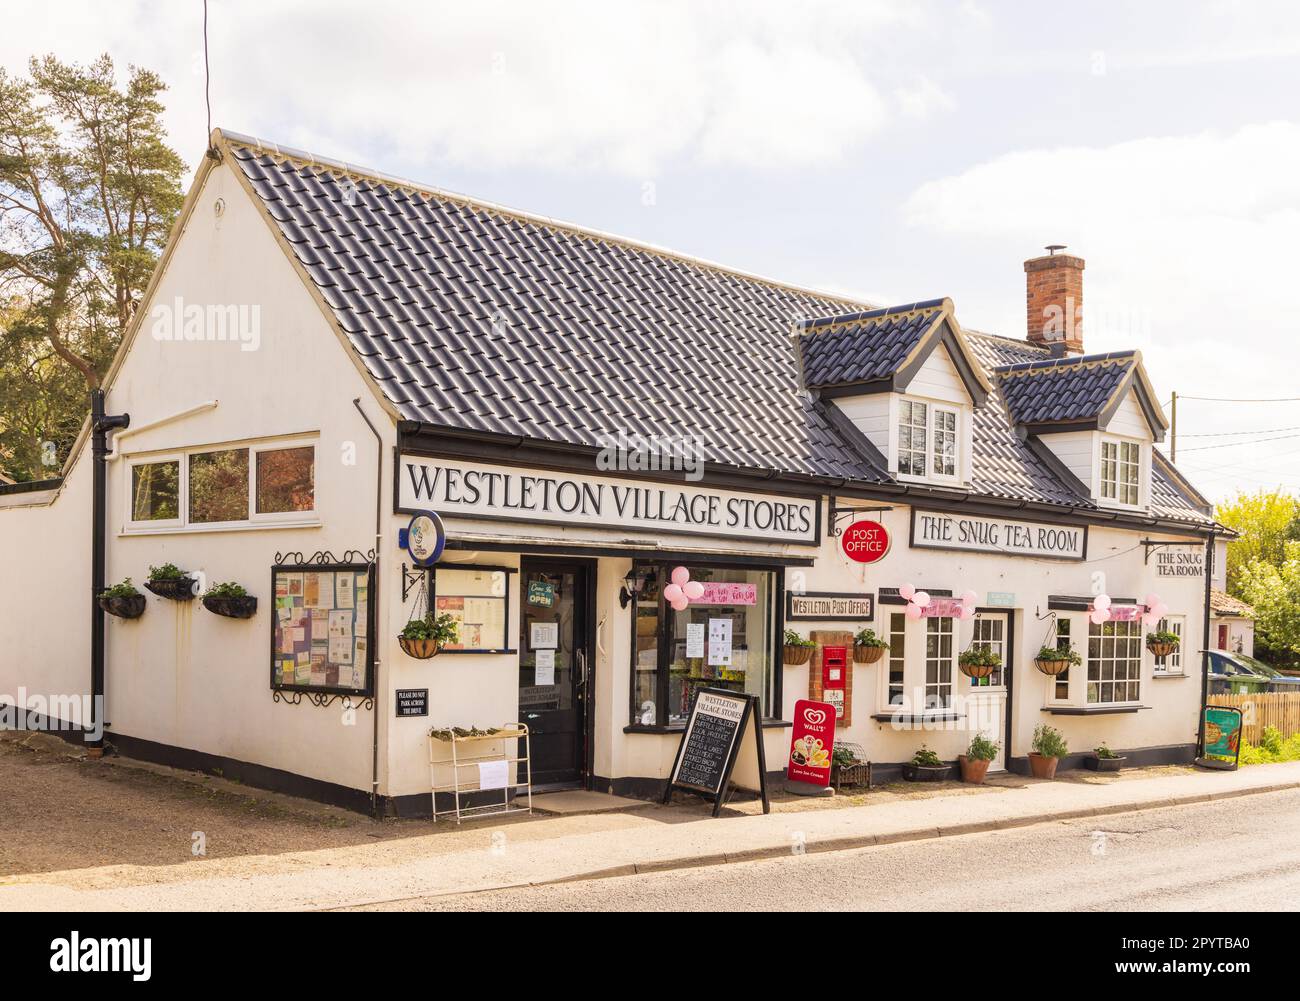 View of a traditional village shop and tea room. Westleton Village Stores and The Snug Tea Room. Suffolk, UK Stock Photo